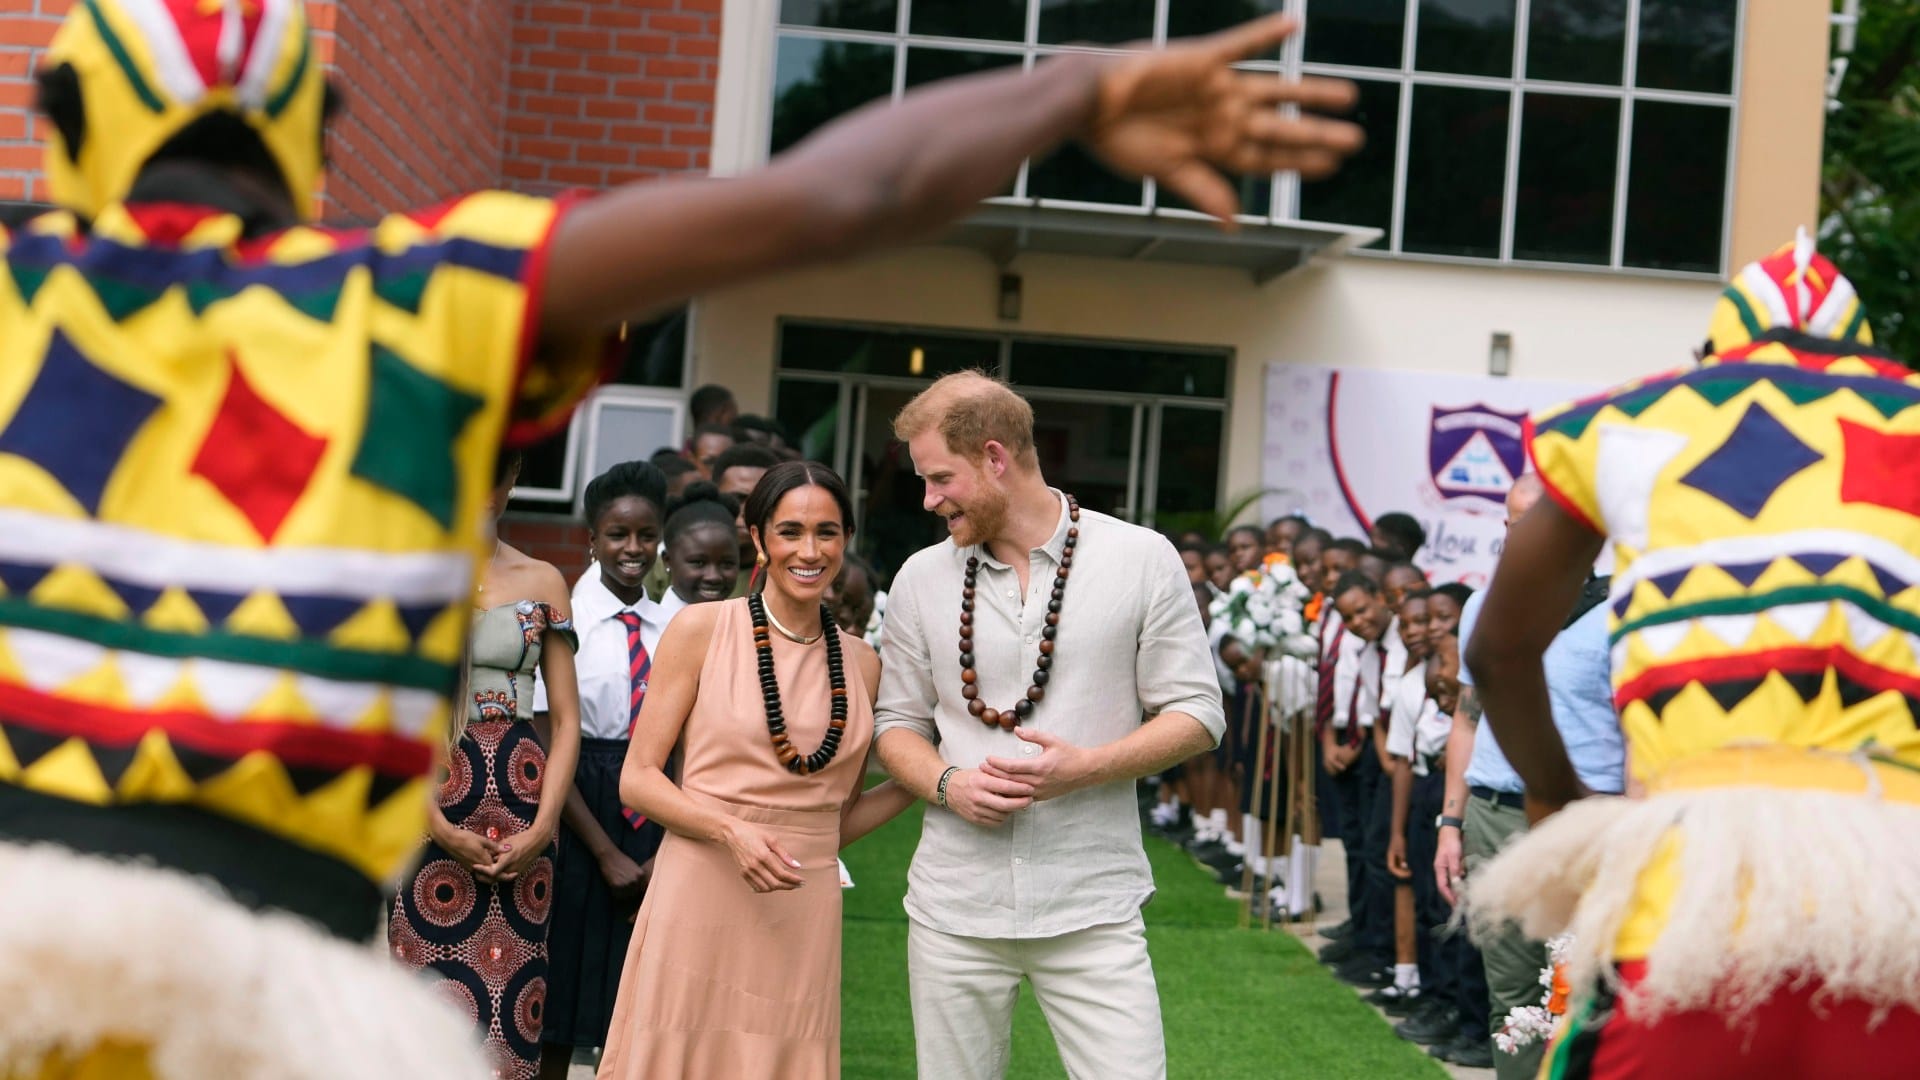 Meghan & Harry dance with schoolkids before duchess heaps praise on her 'smart' husband who 'always tells the truth'